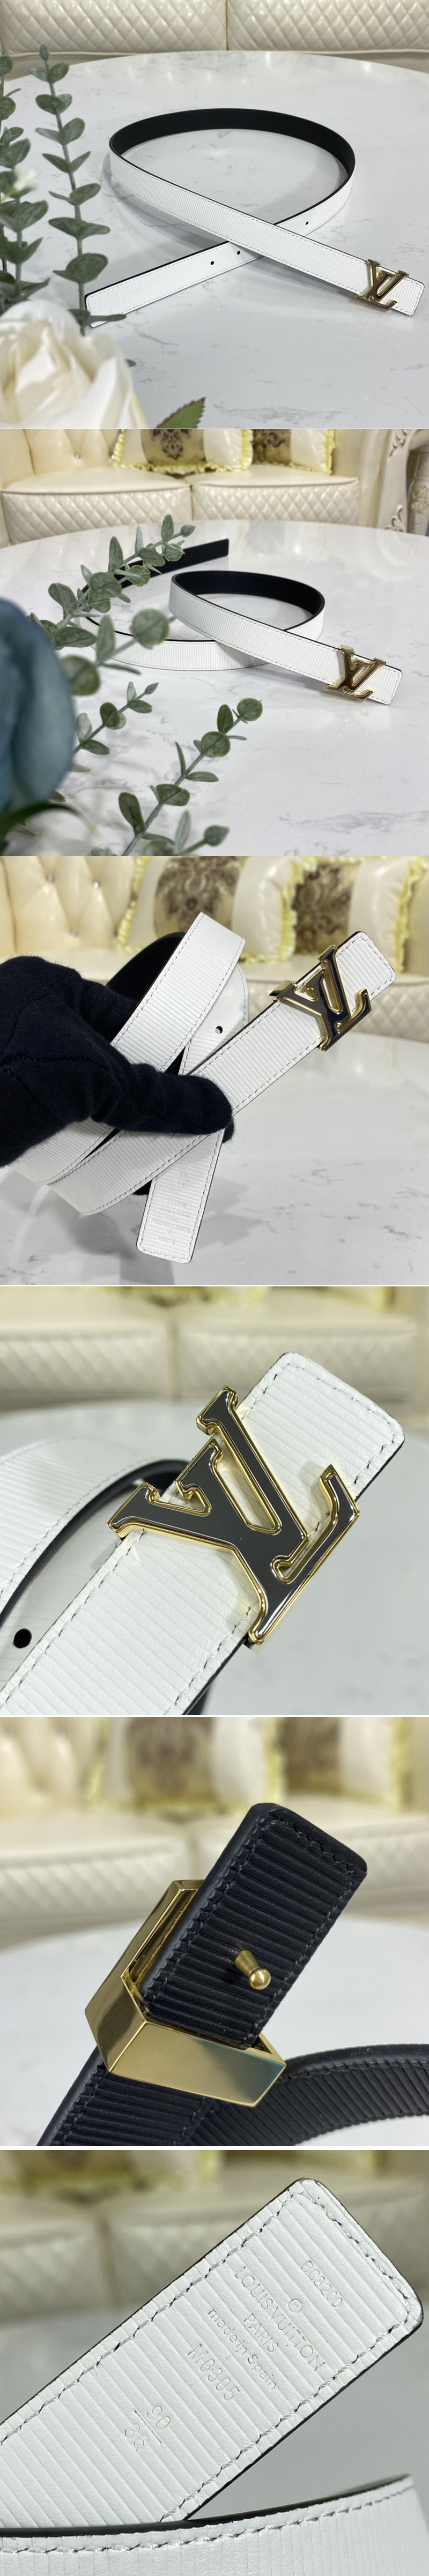 Lv Iconic Pearlfection 25mm Reversible Belt